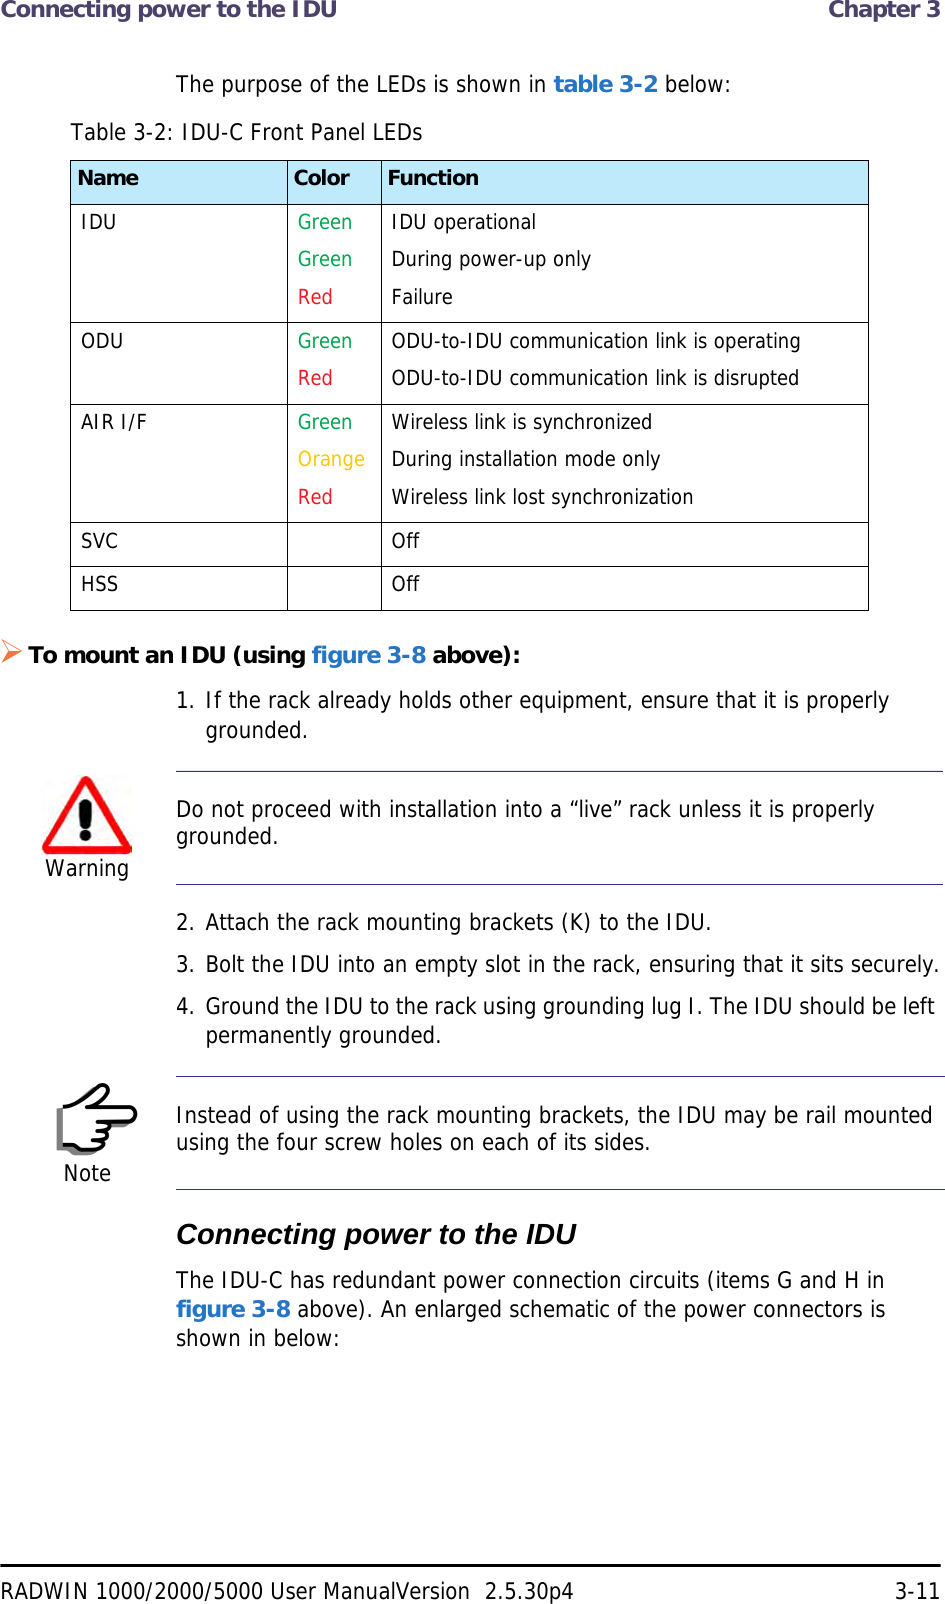 Connecting power to the IDU  Chapter 3RADWIN 1000/2000/5000 User ManualVersion  2.5.30p4 3-11The purpose of the LEDs is shown in table 3-2 below:To mount an IDU (using figure 3-8 above):1. If the rack already holds other equipment, ensure that it is properly grounded.2. Attach the rack mounting brackets (K) to the IDU.3. Bolt the IDU into an empty slot in the rack, ensuring that it sits securely.4. Ground the IDU to the rack using grounding lug I. The IDU should be left permanently grounded.Connecting power to the IDUThe IDU-C has redundant power connection circuits (items G and H in figure 3-8 above). An enlarged schematic of the power connectors is shown in below:Table 3-2: IDU-C Front Panel LEDsName Color FunctionIDU GreenGreenRedIDU operationalDuring power-up onlyFailureODU GreenRedODU-to-IDU communication link is operatingODU-to-IDU communication link is disrupted AIR I/F GreenOrangeRedWireless link is synchronizedDuring installation mode onlyWireless link lost synchronizationSVC OffHSS OffWarningDo not proceed with installation into a “live” rack unless it is properly grounded.NoteInstead of using the rack mounting brackets, the IDU may be rail mounted using the four screw holes on each of its sides.